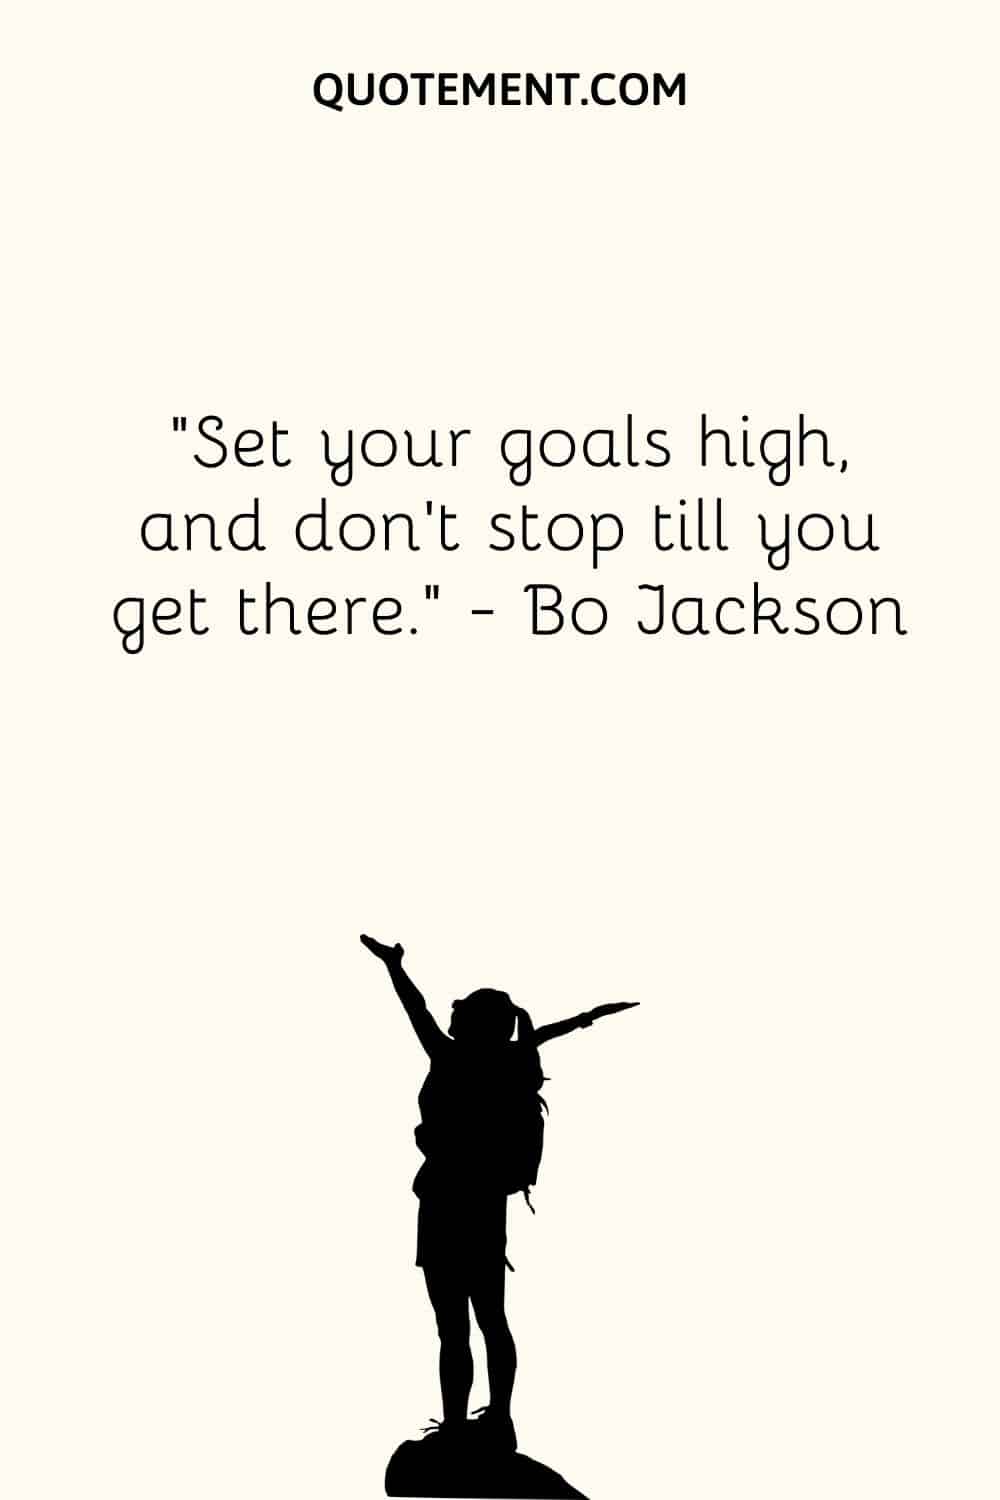 Set your goals high, and don’t stop till you get there.